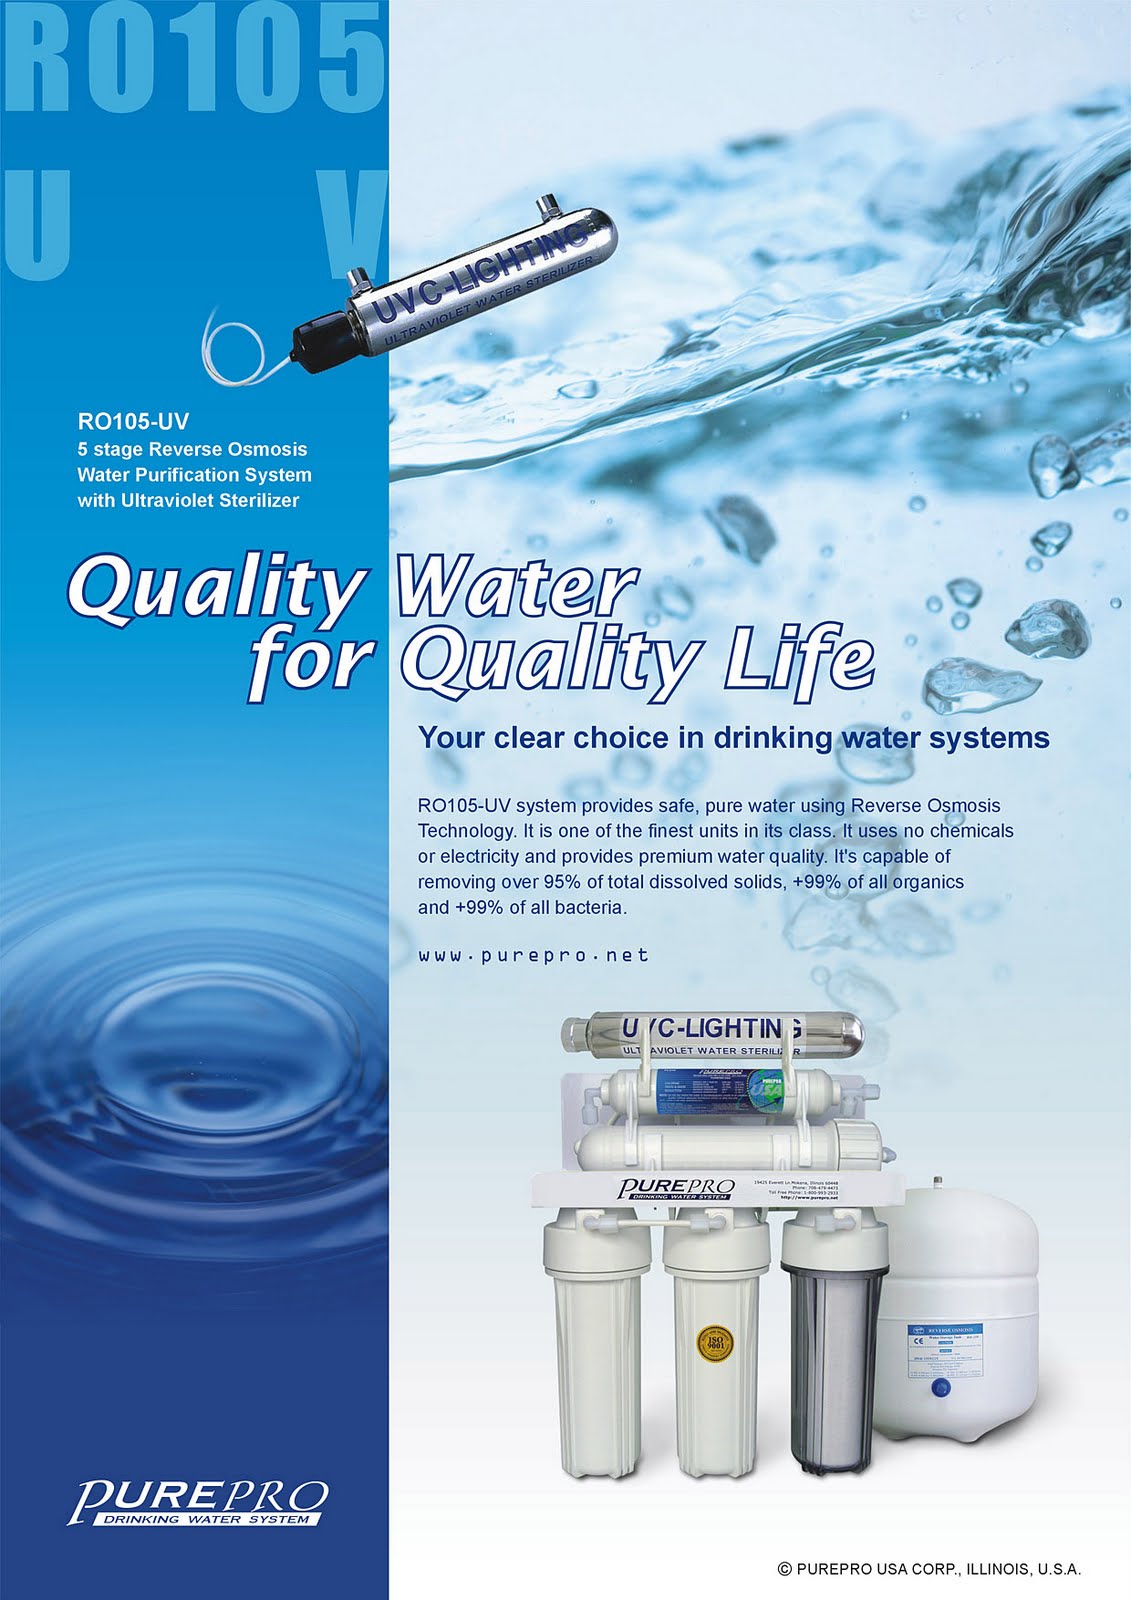 Pure-Pro Water Corporation